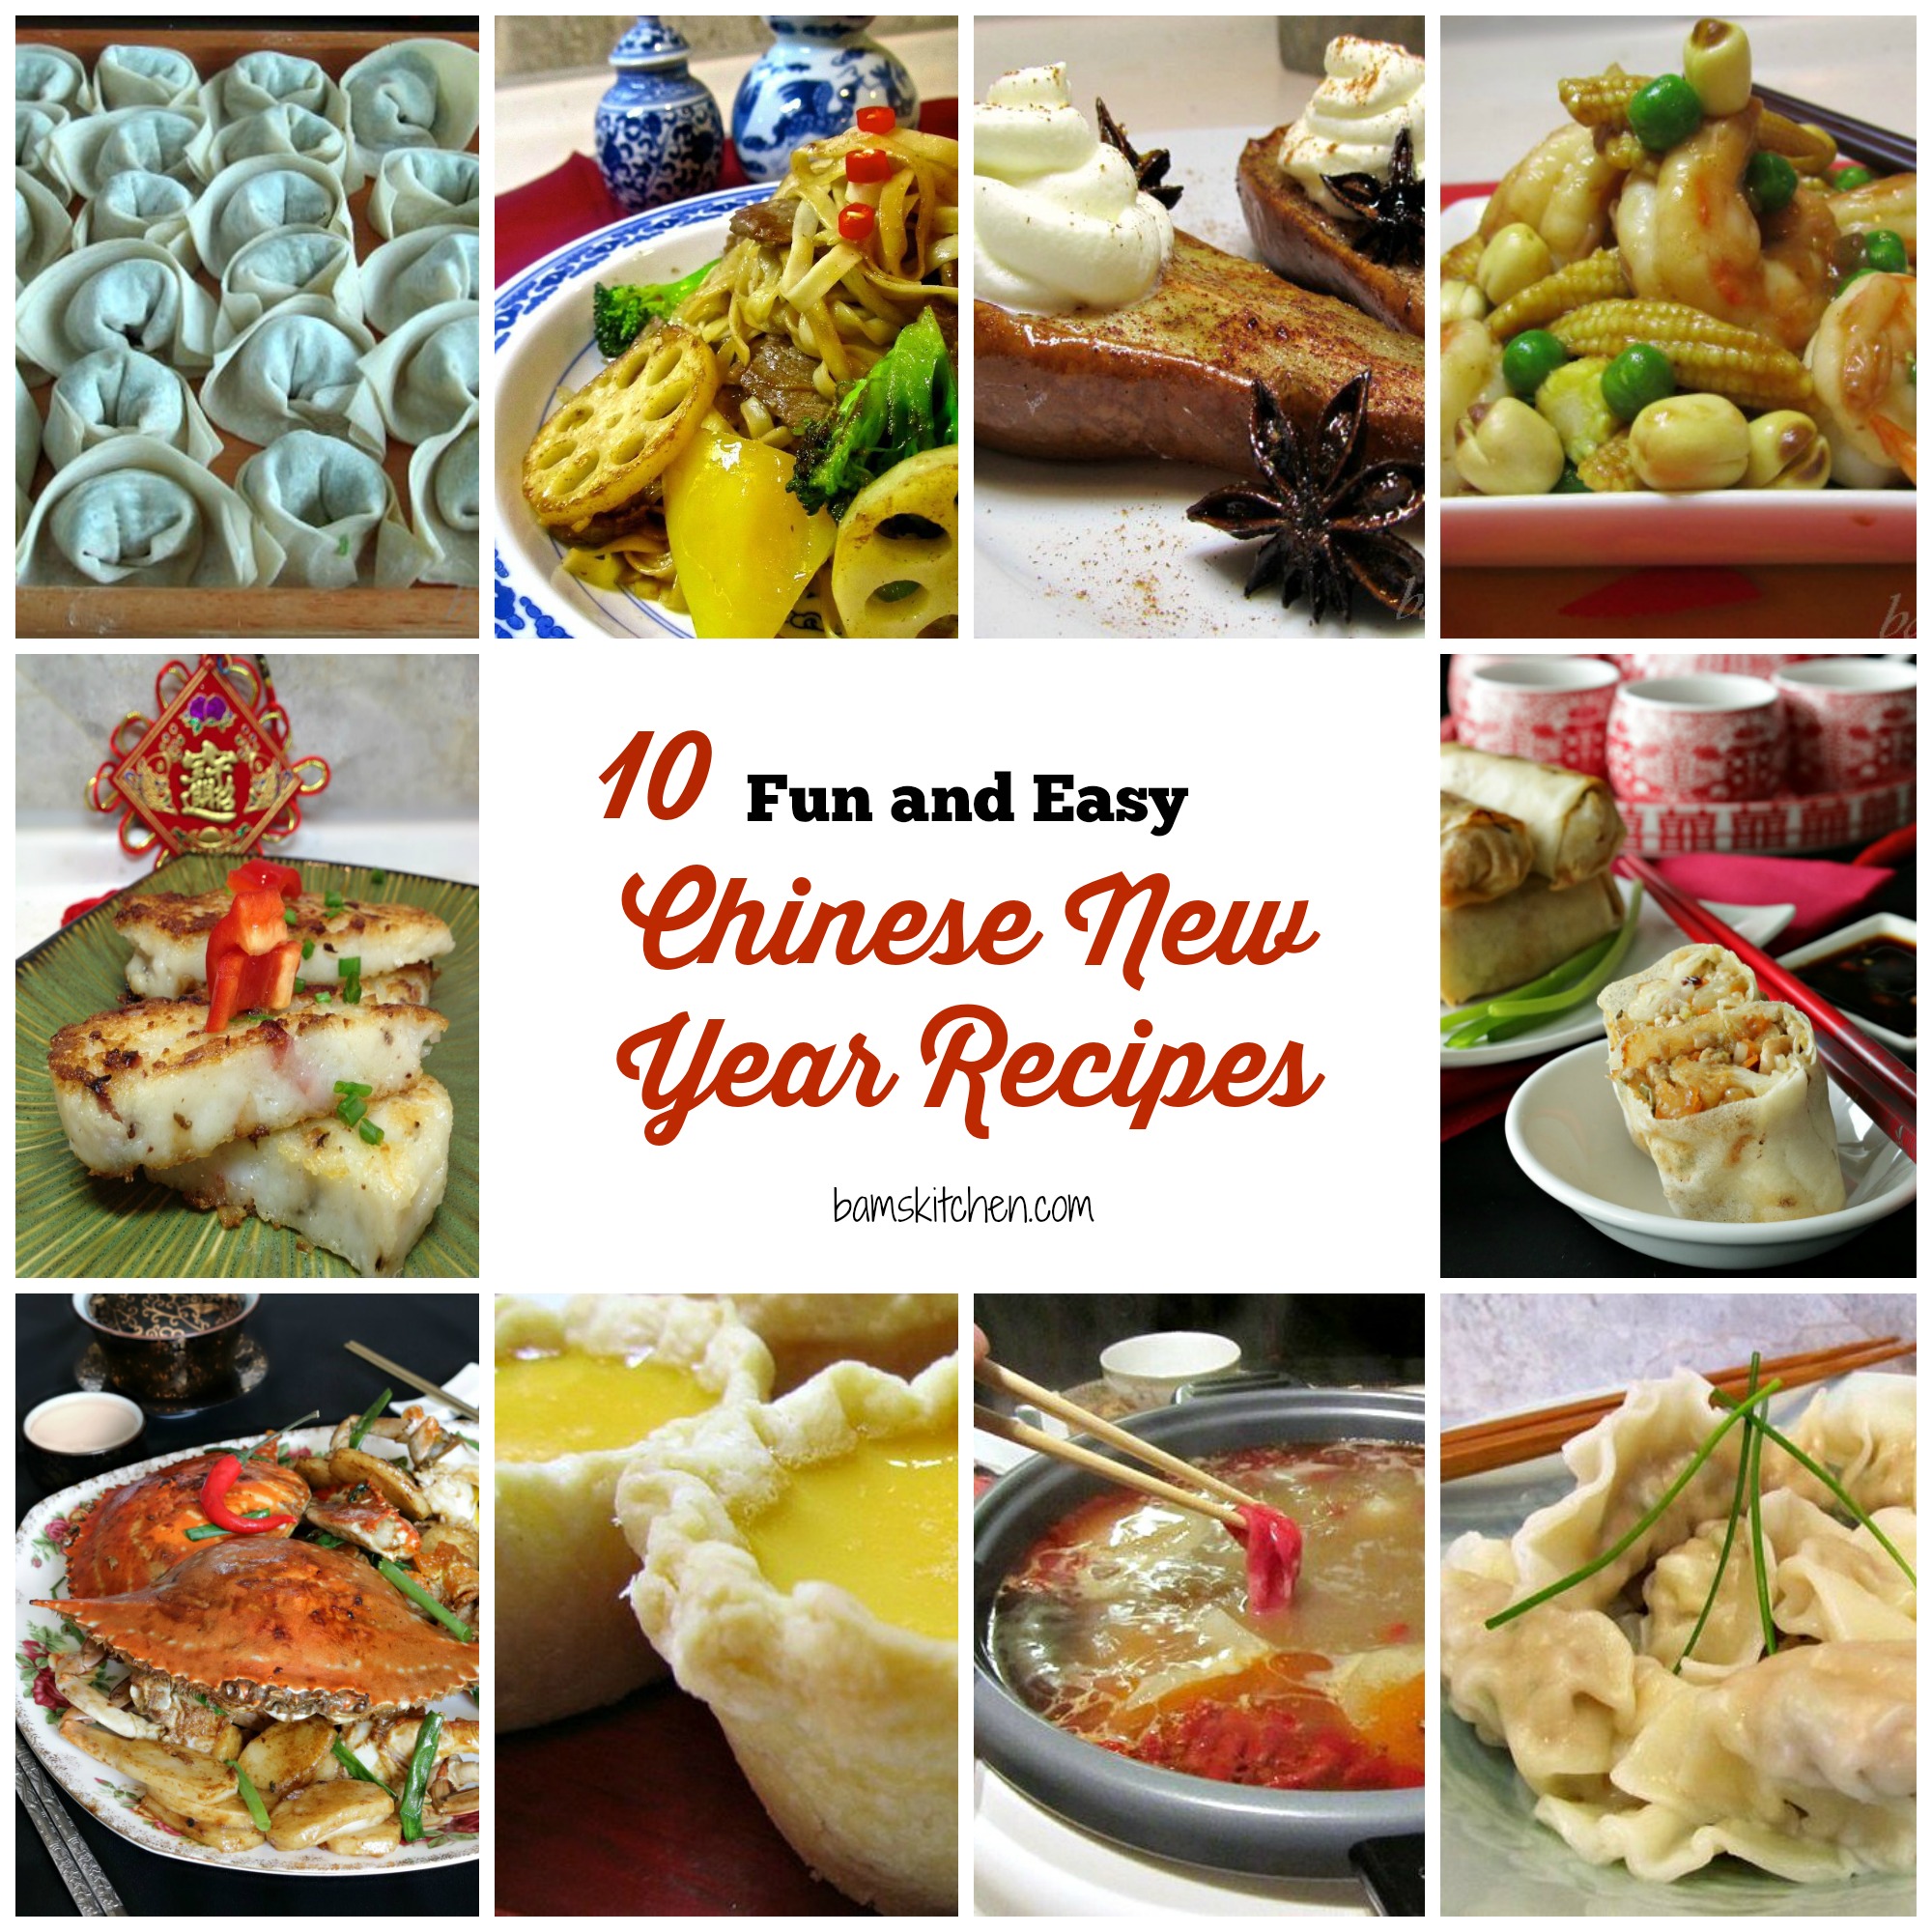 10 Fun and Easy Chinese New Year Recipes - Healthy World 